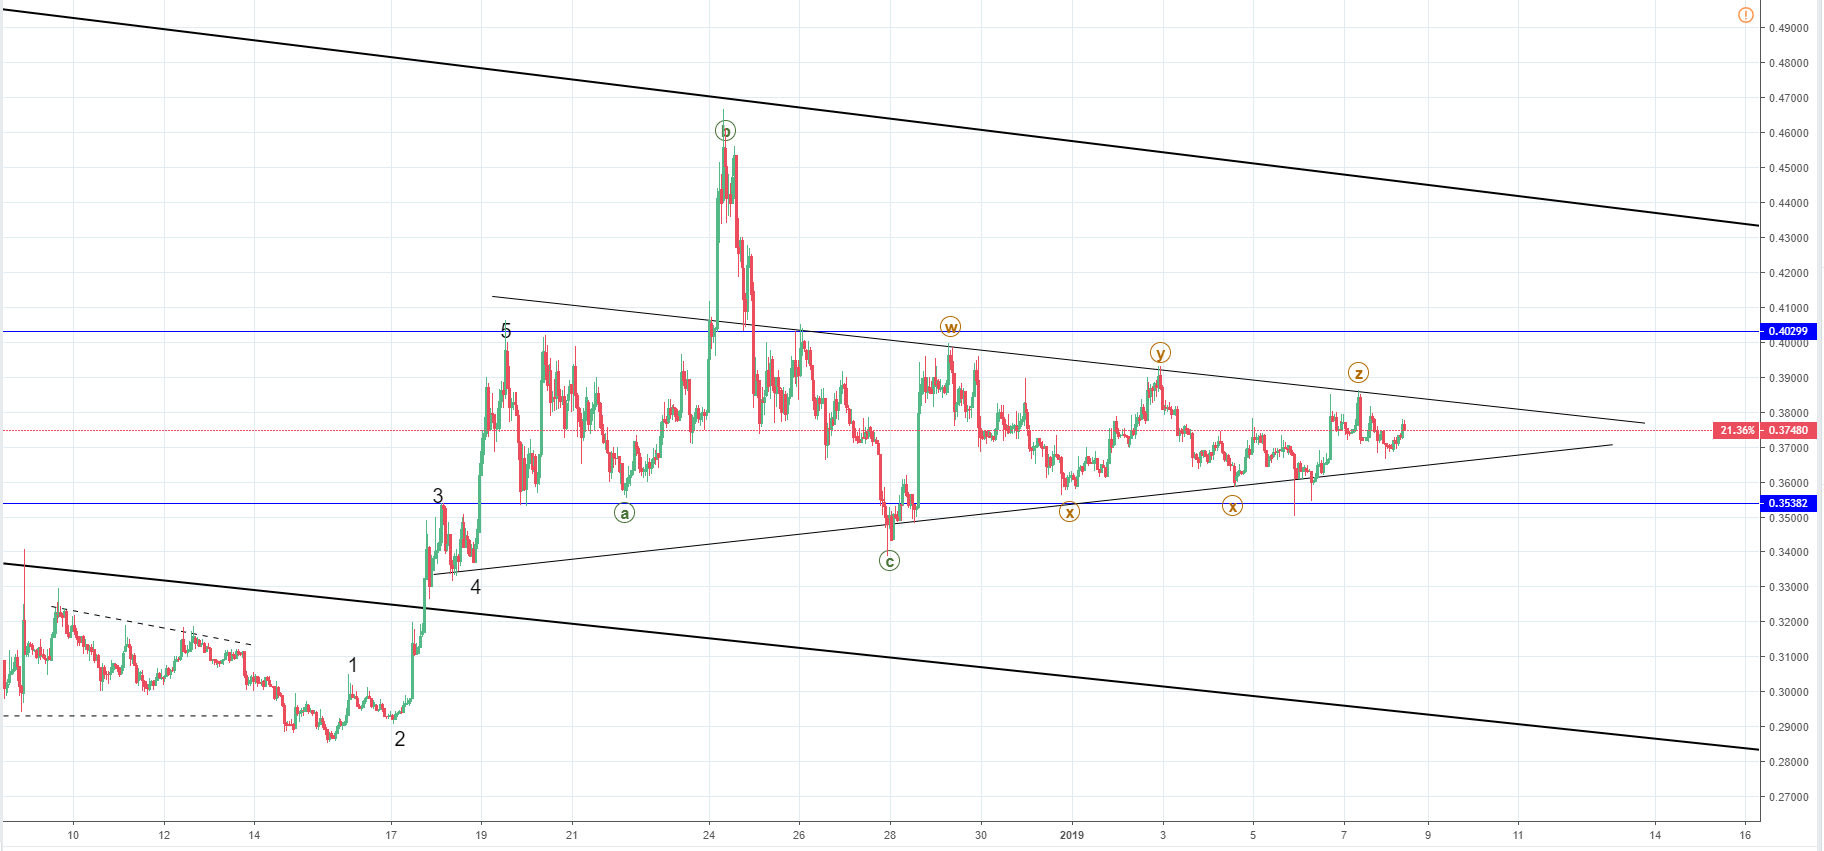 BTC/USD and XRP/USD in a sideways movement